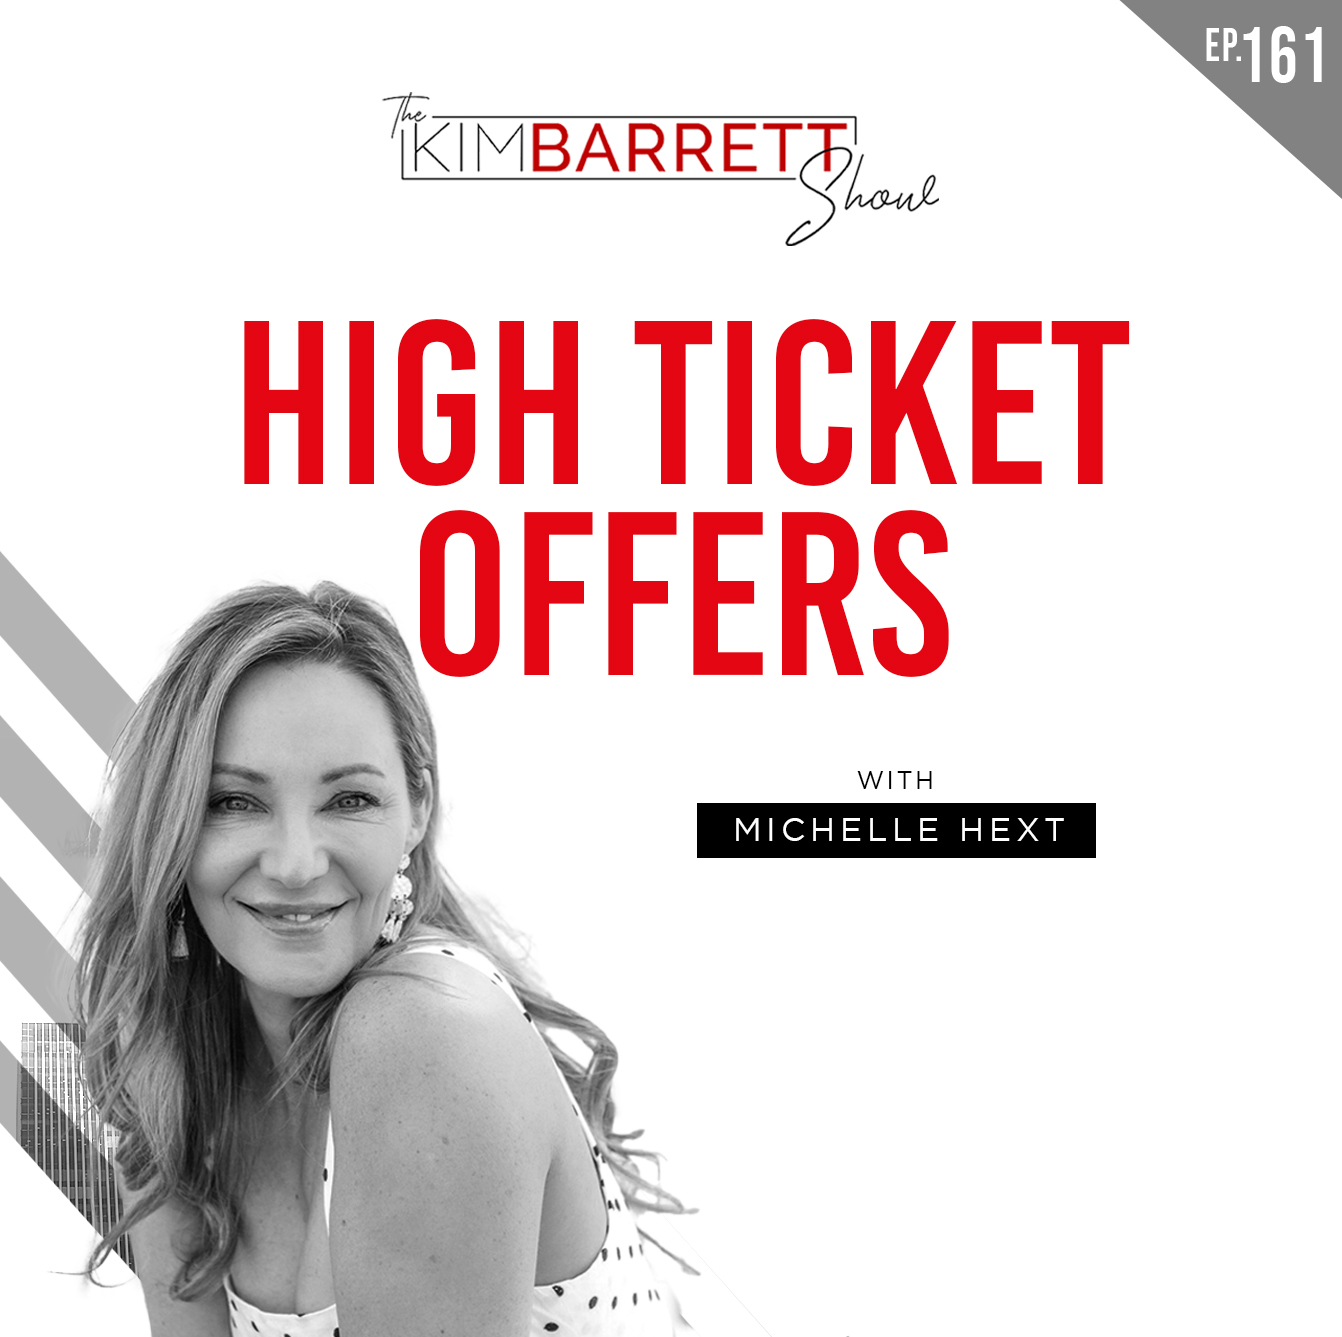 High Ticket Offers with Michelle Hext